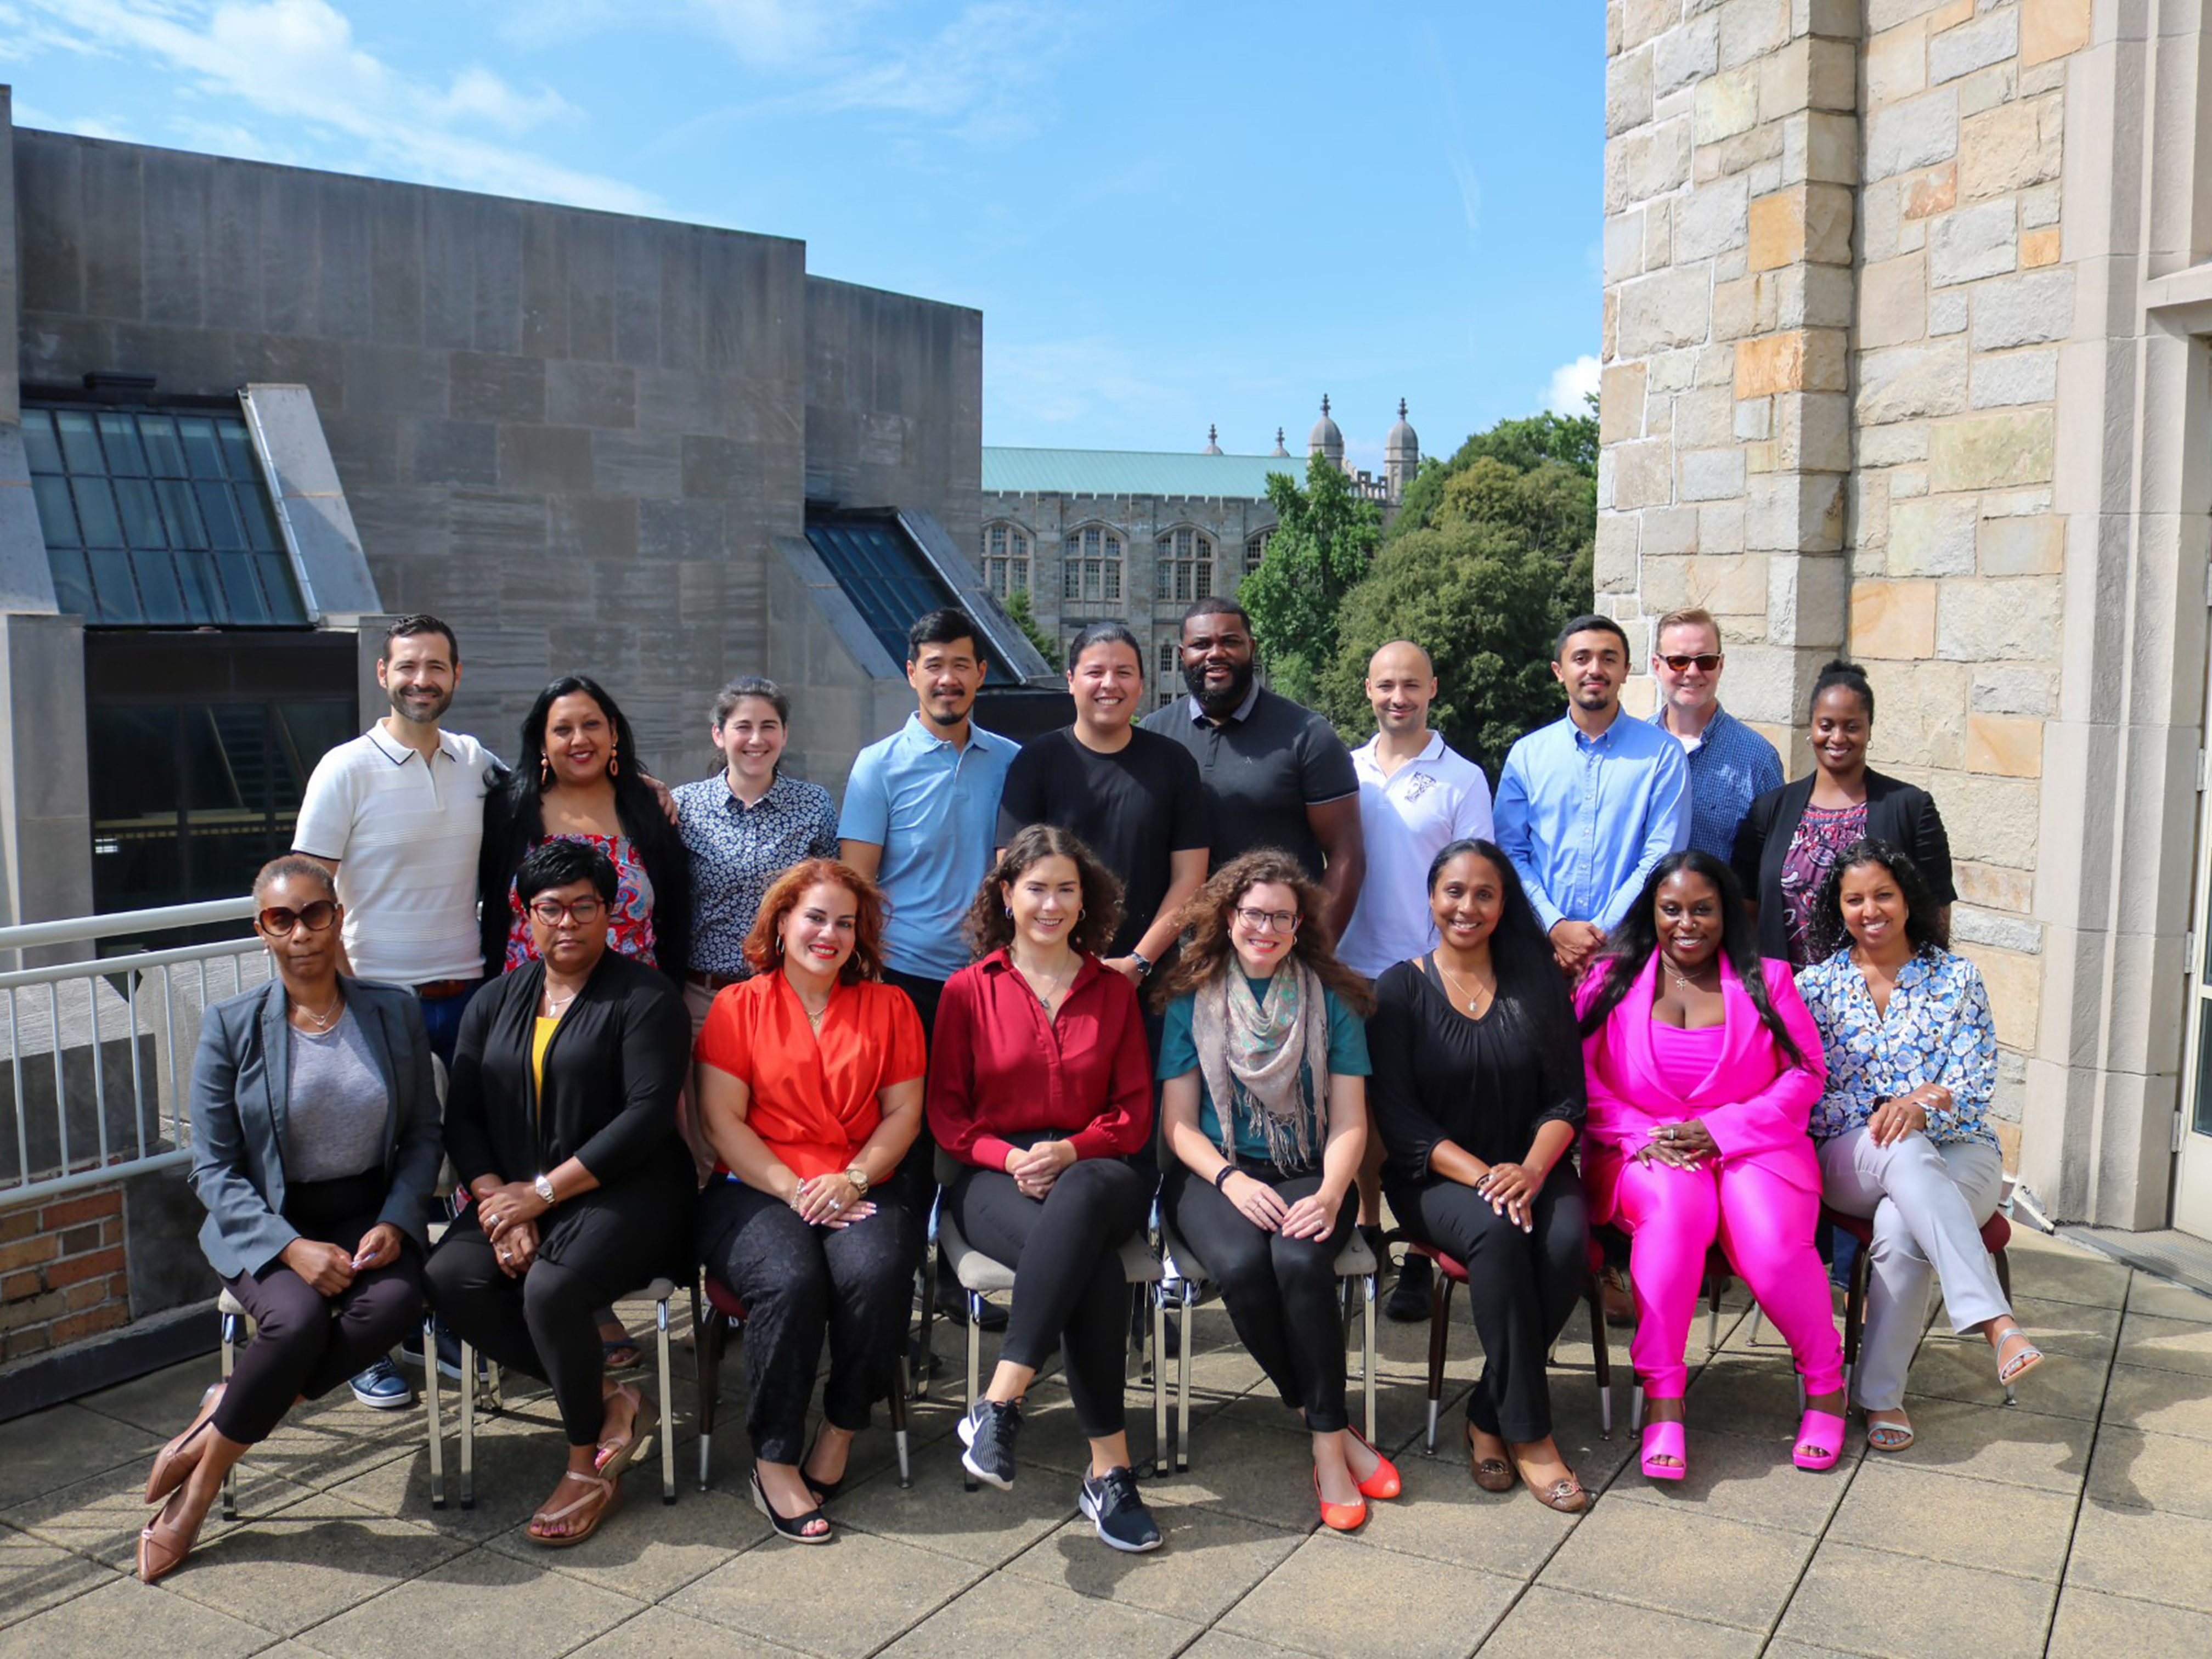 Meet the first cohort of the Ed.D. in Organizational Leadership, Development and Change, the first doctoral program offered by Lehman’s School of Education and the first program of its kind at CUNY!